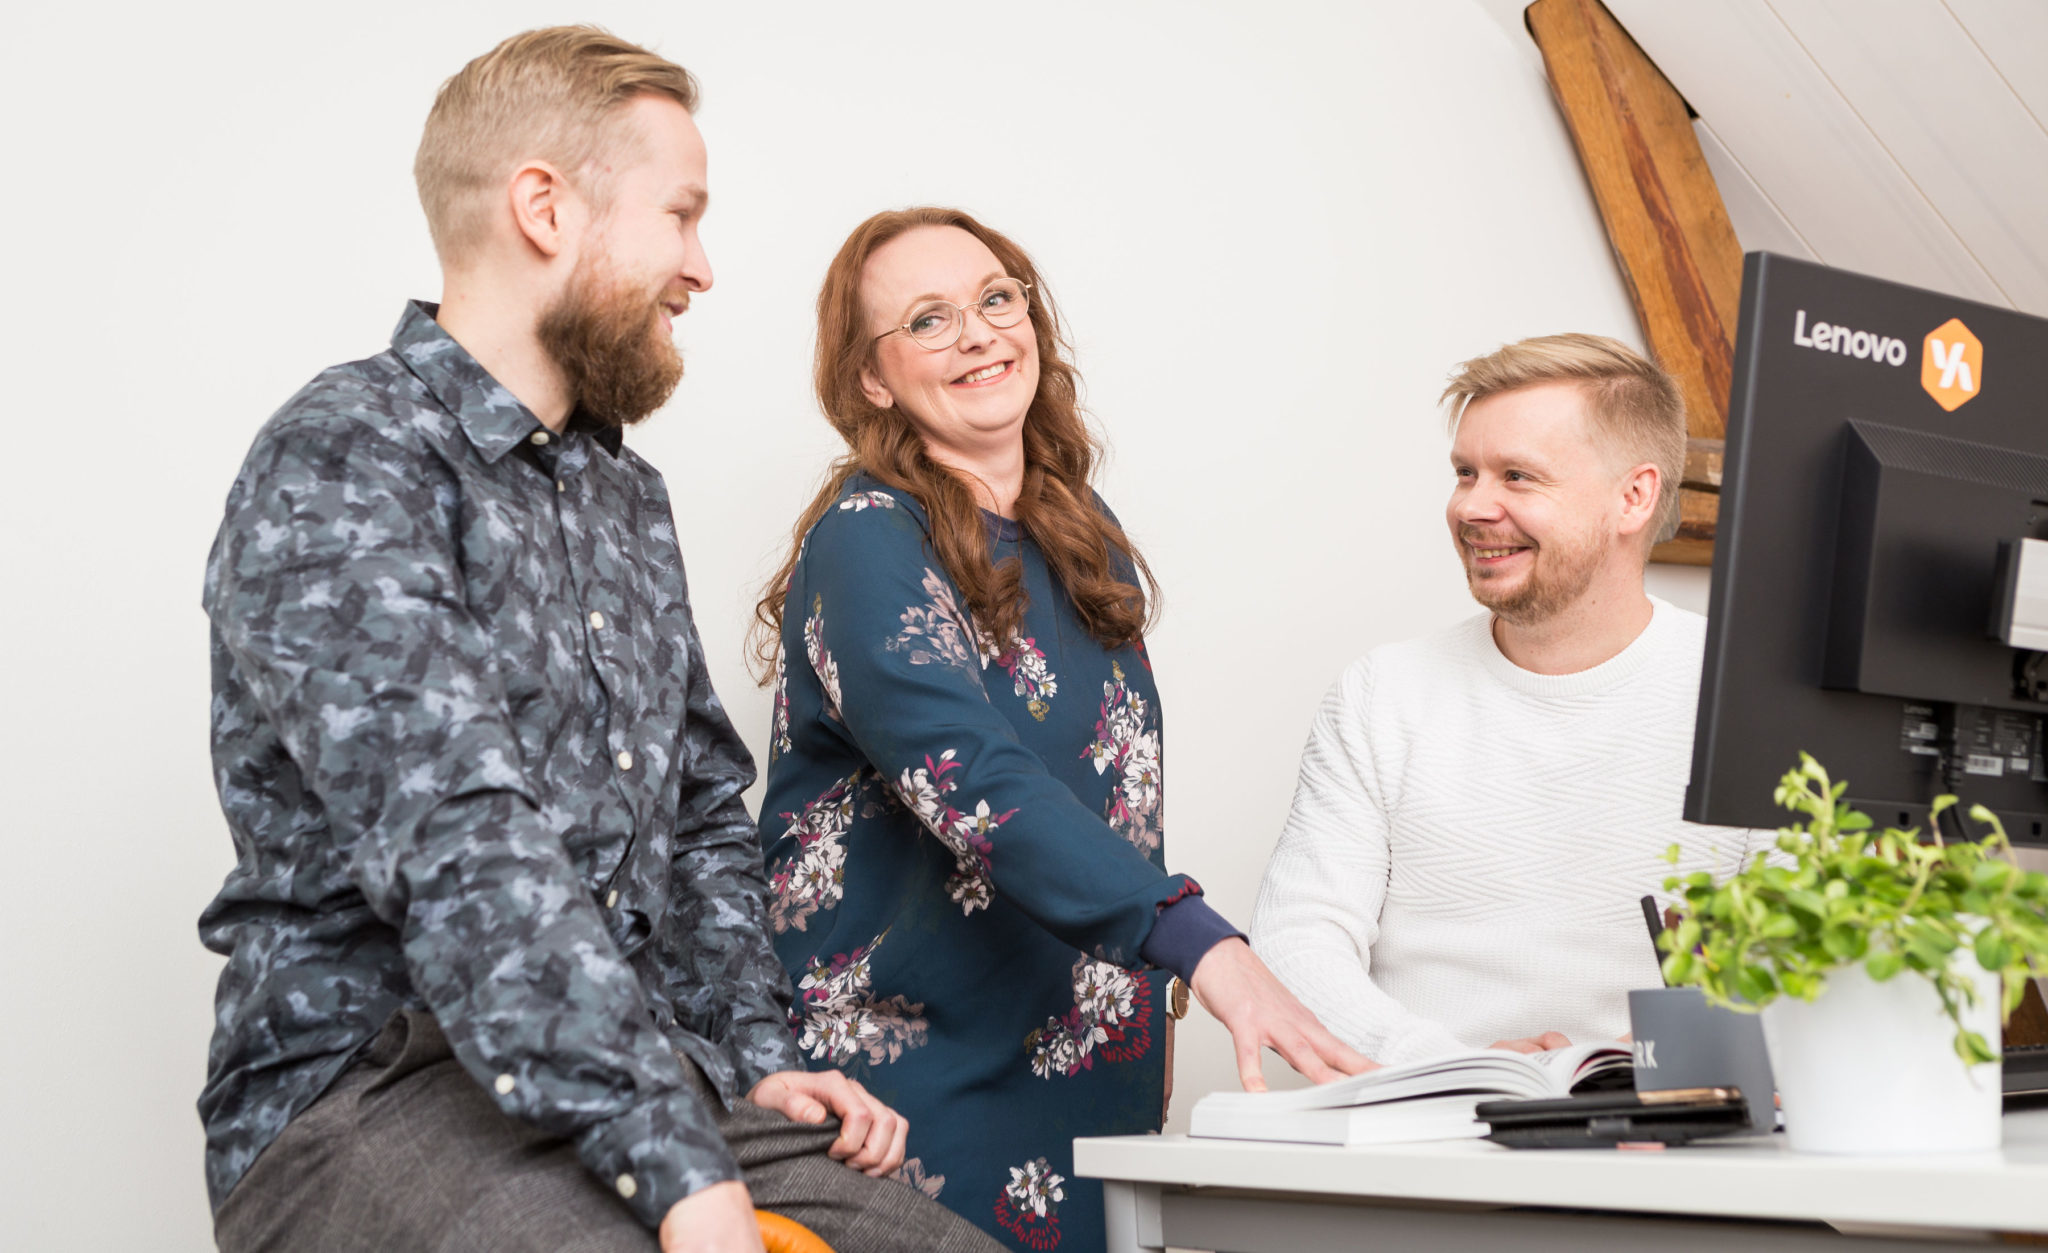 Change management coaching, in the image from the left: quality manager Tuomas Timonen, operational manager Outi Arontie and superior of the software team Joni Norring